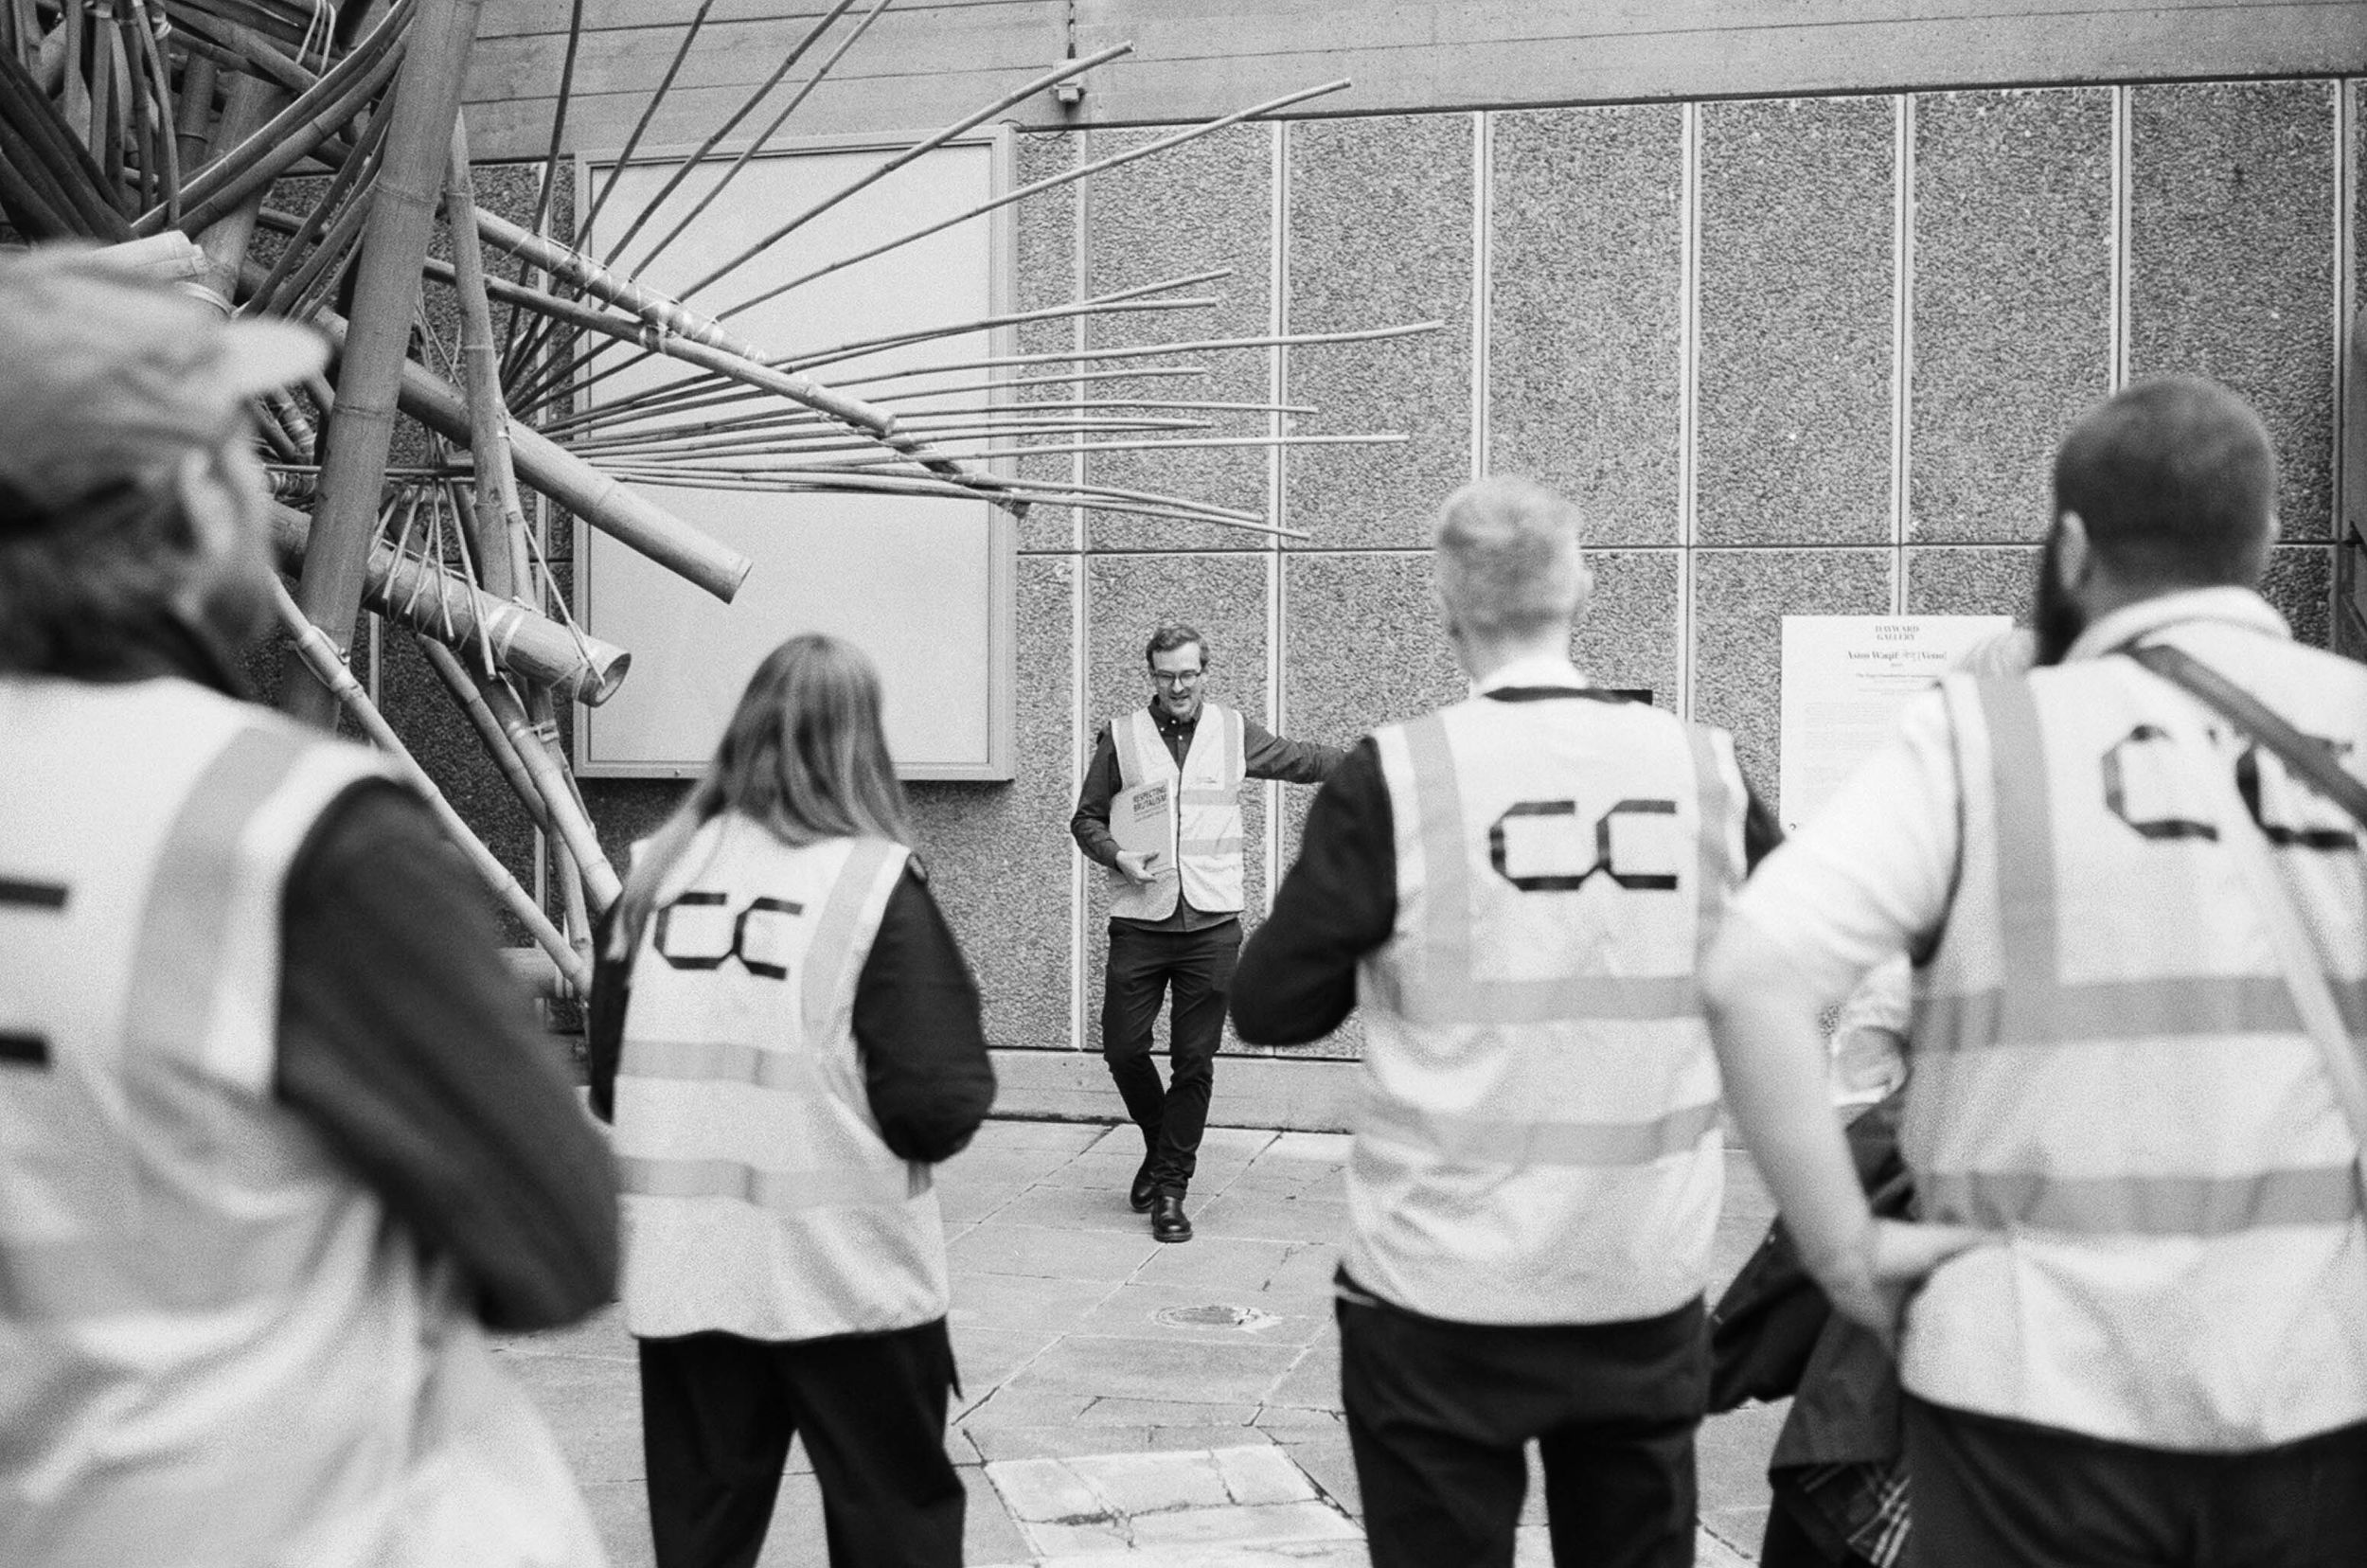 Shot from behind, a group of people wearing hi-vis with Concrete Communities logo printed on the back at the Southbank Centre, London.